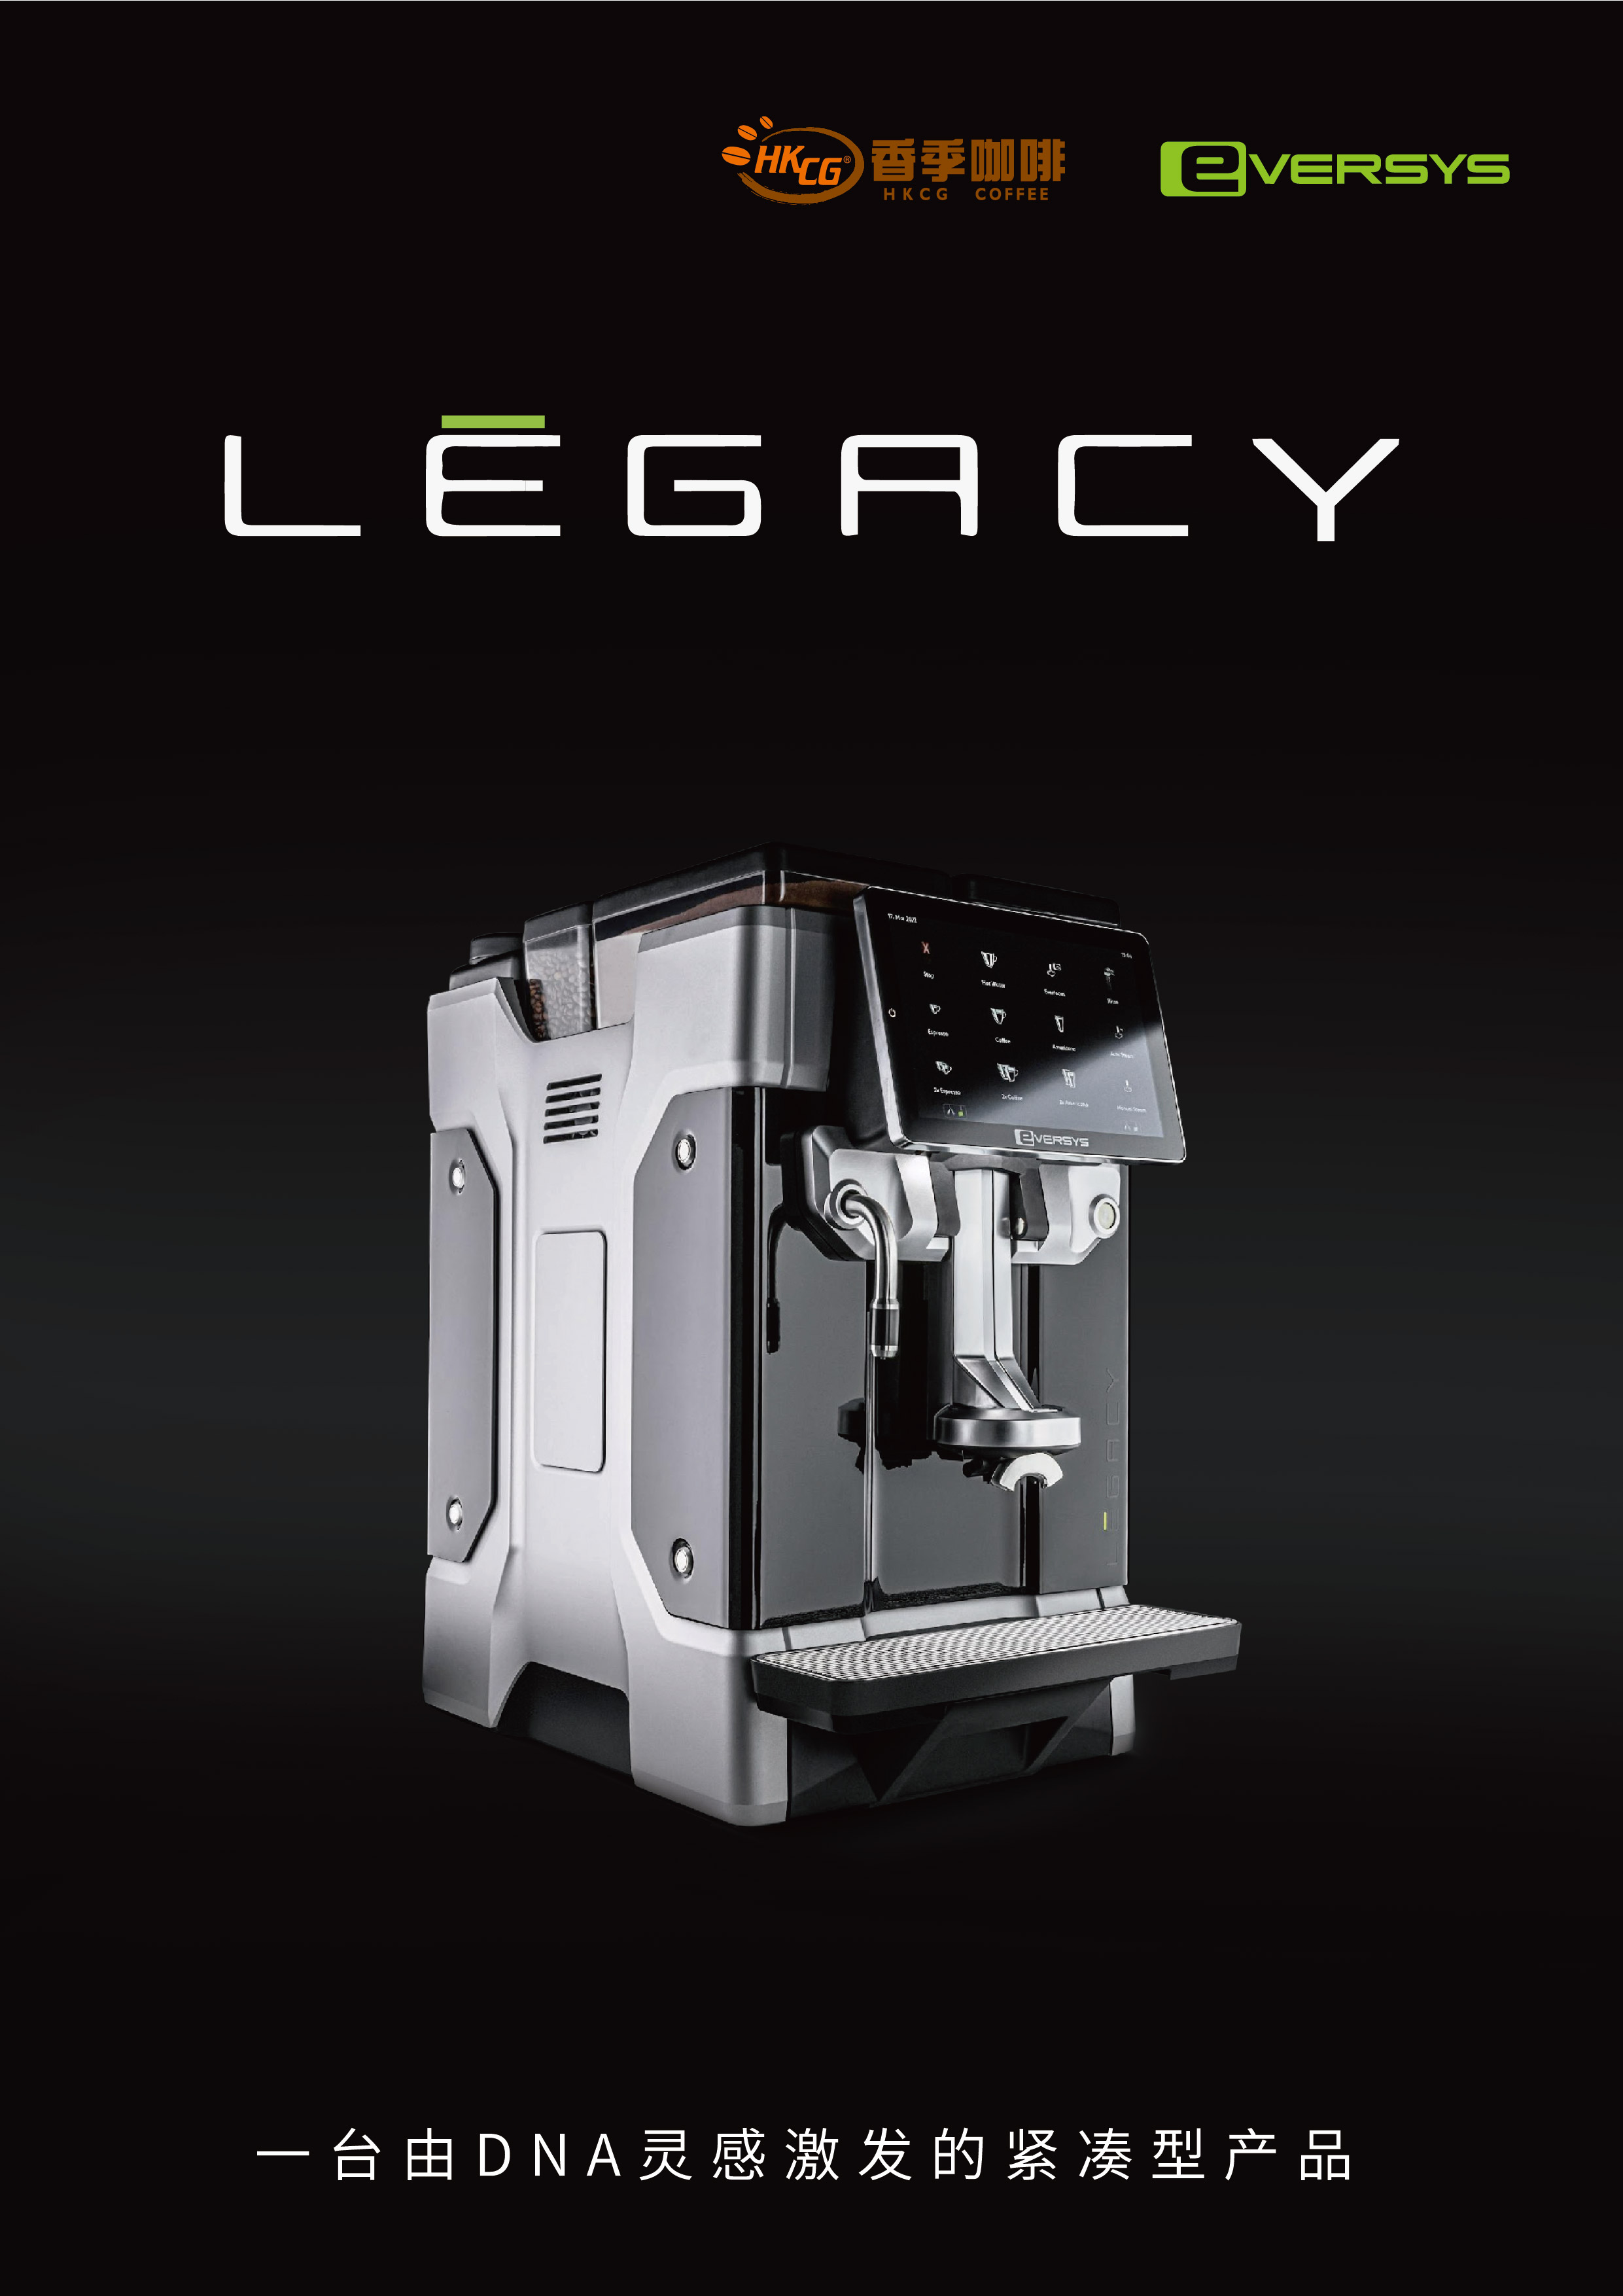 EVERSYS LEGACY